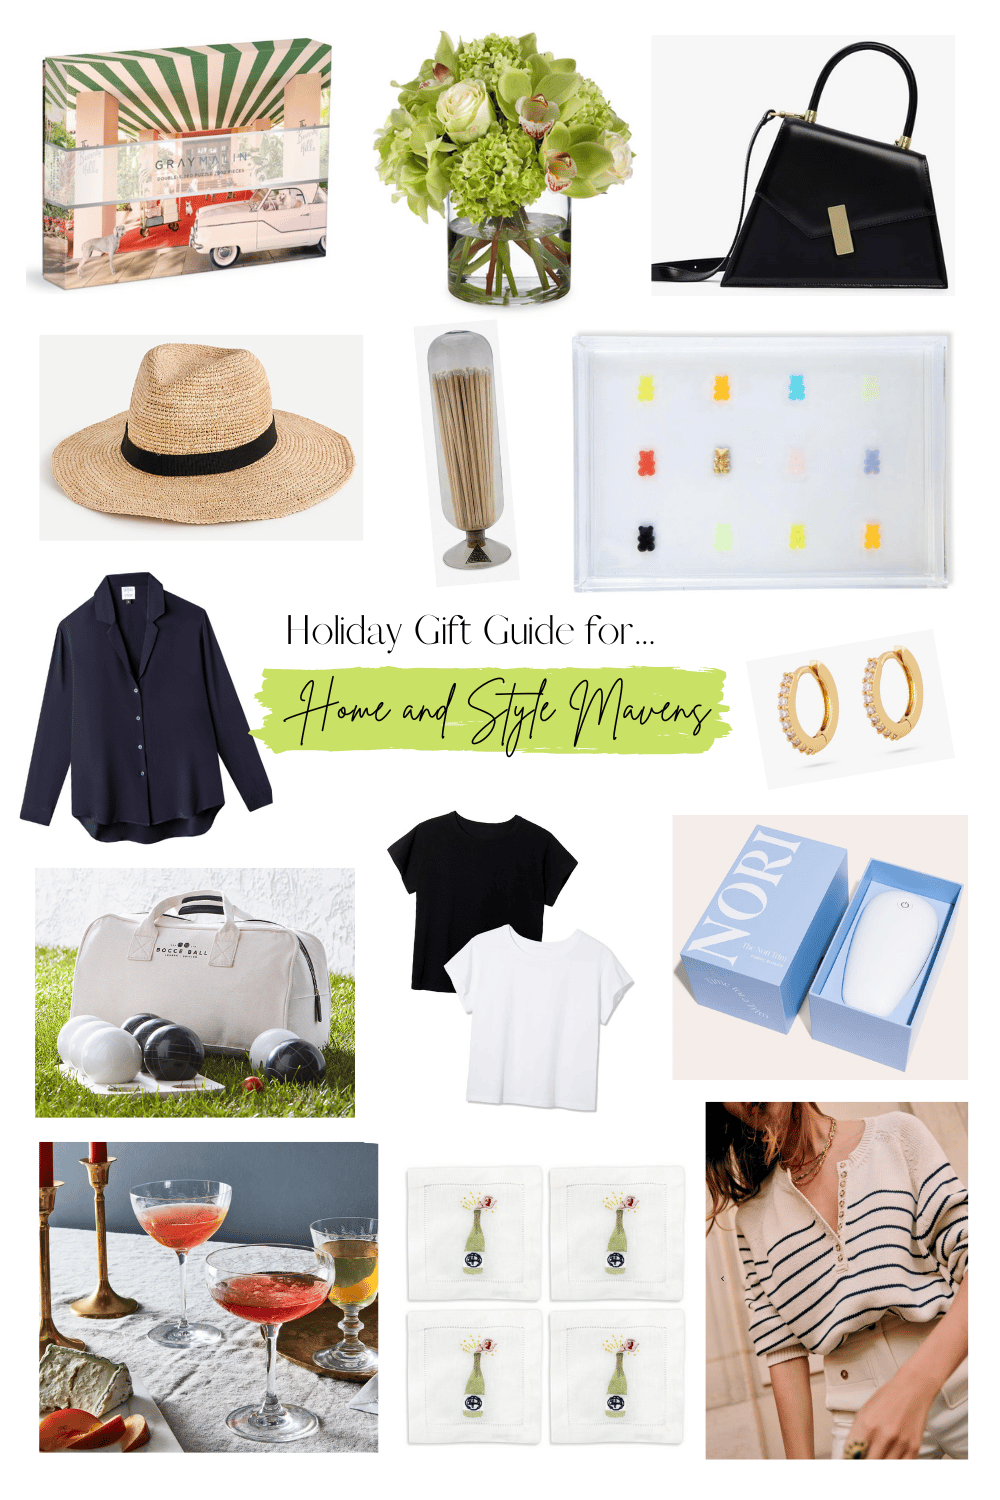 Collage of gift ideas for home decor and style mavens